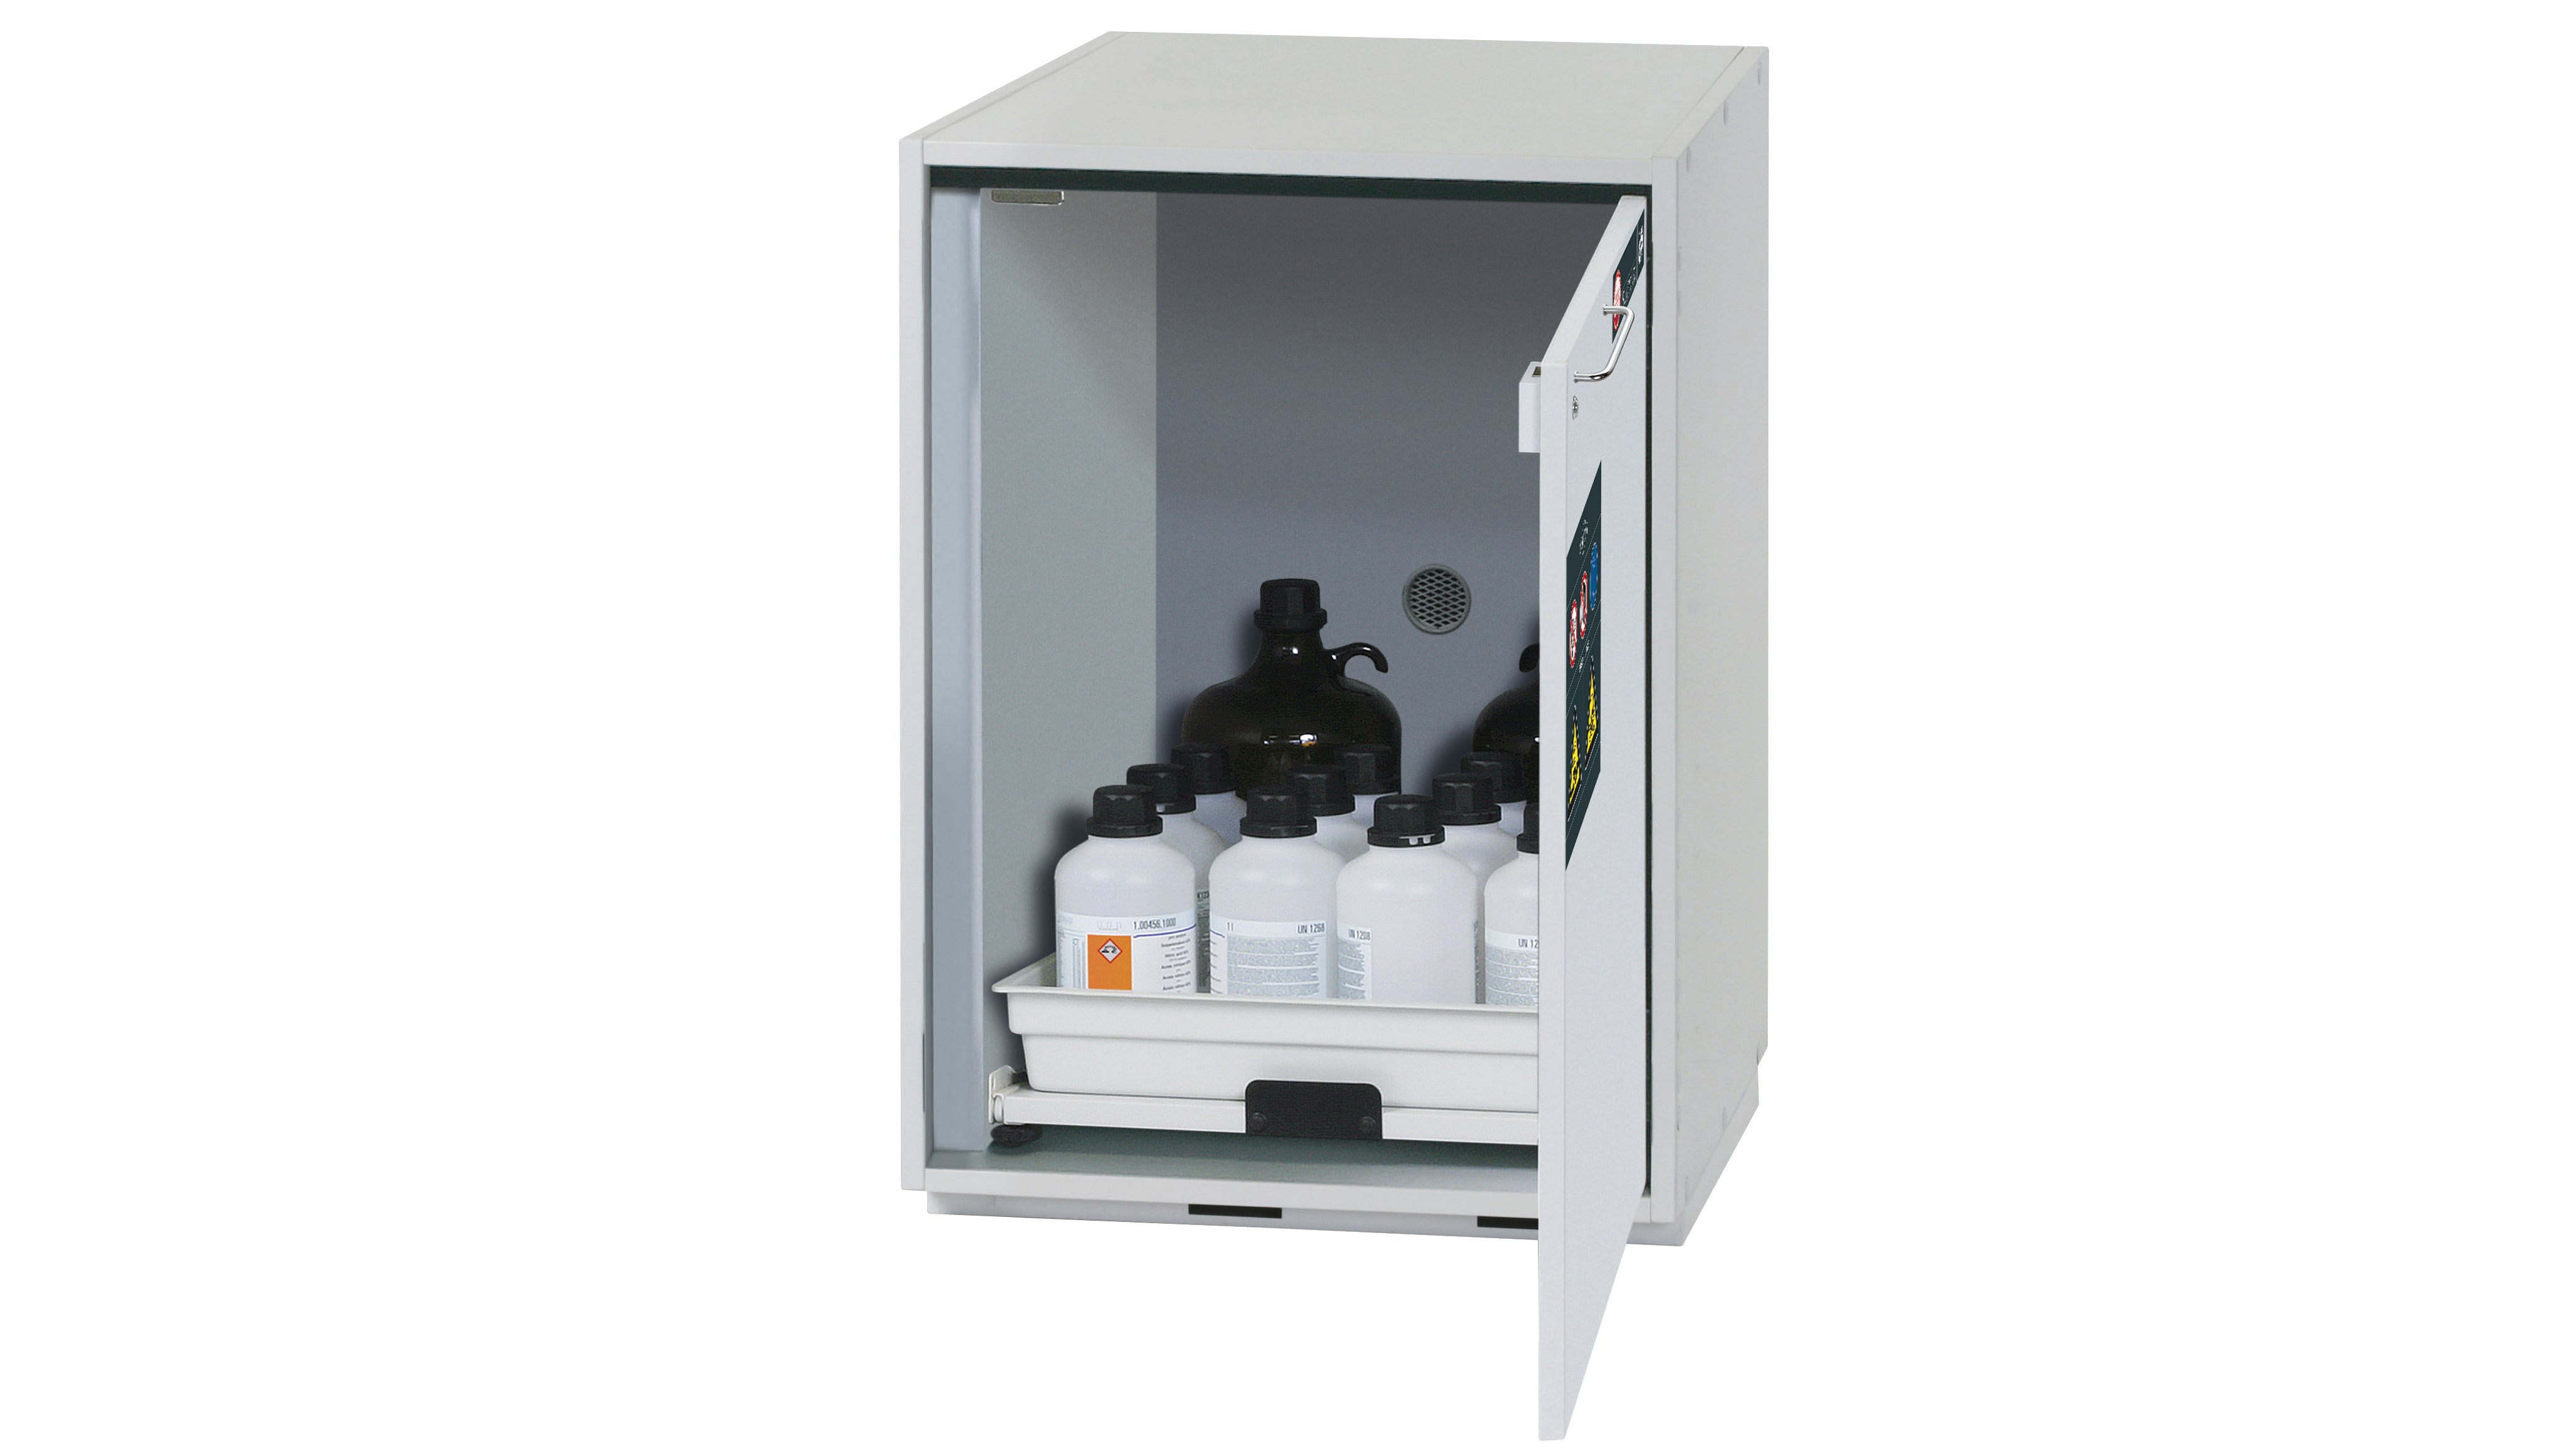 Acid and alkali base cabinet SL-CLASSIC-UB model SL.080.059.UB.TR in light gray with 1x AbZ shelf pull-out (FP plate/polypropylene)